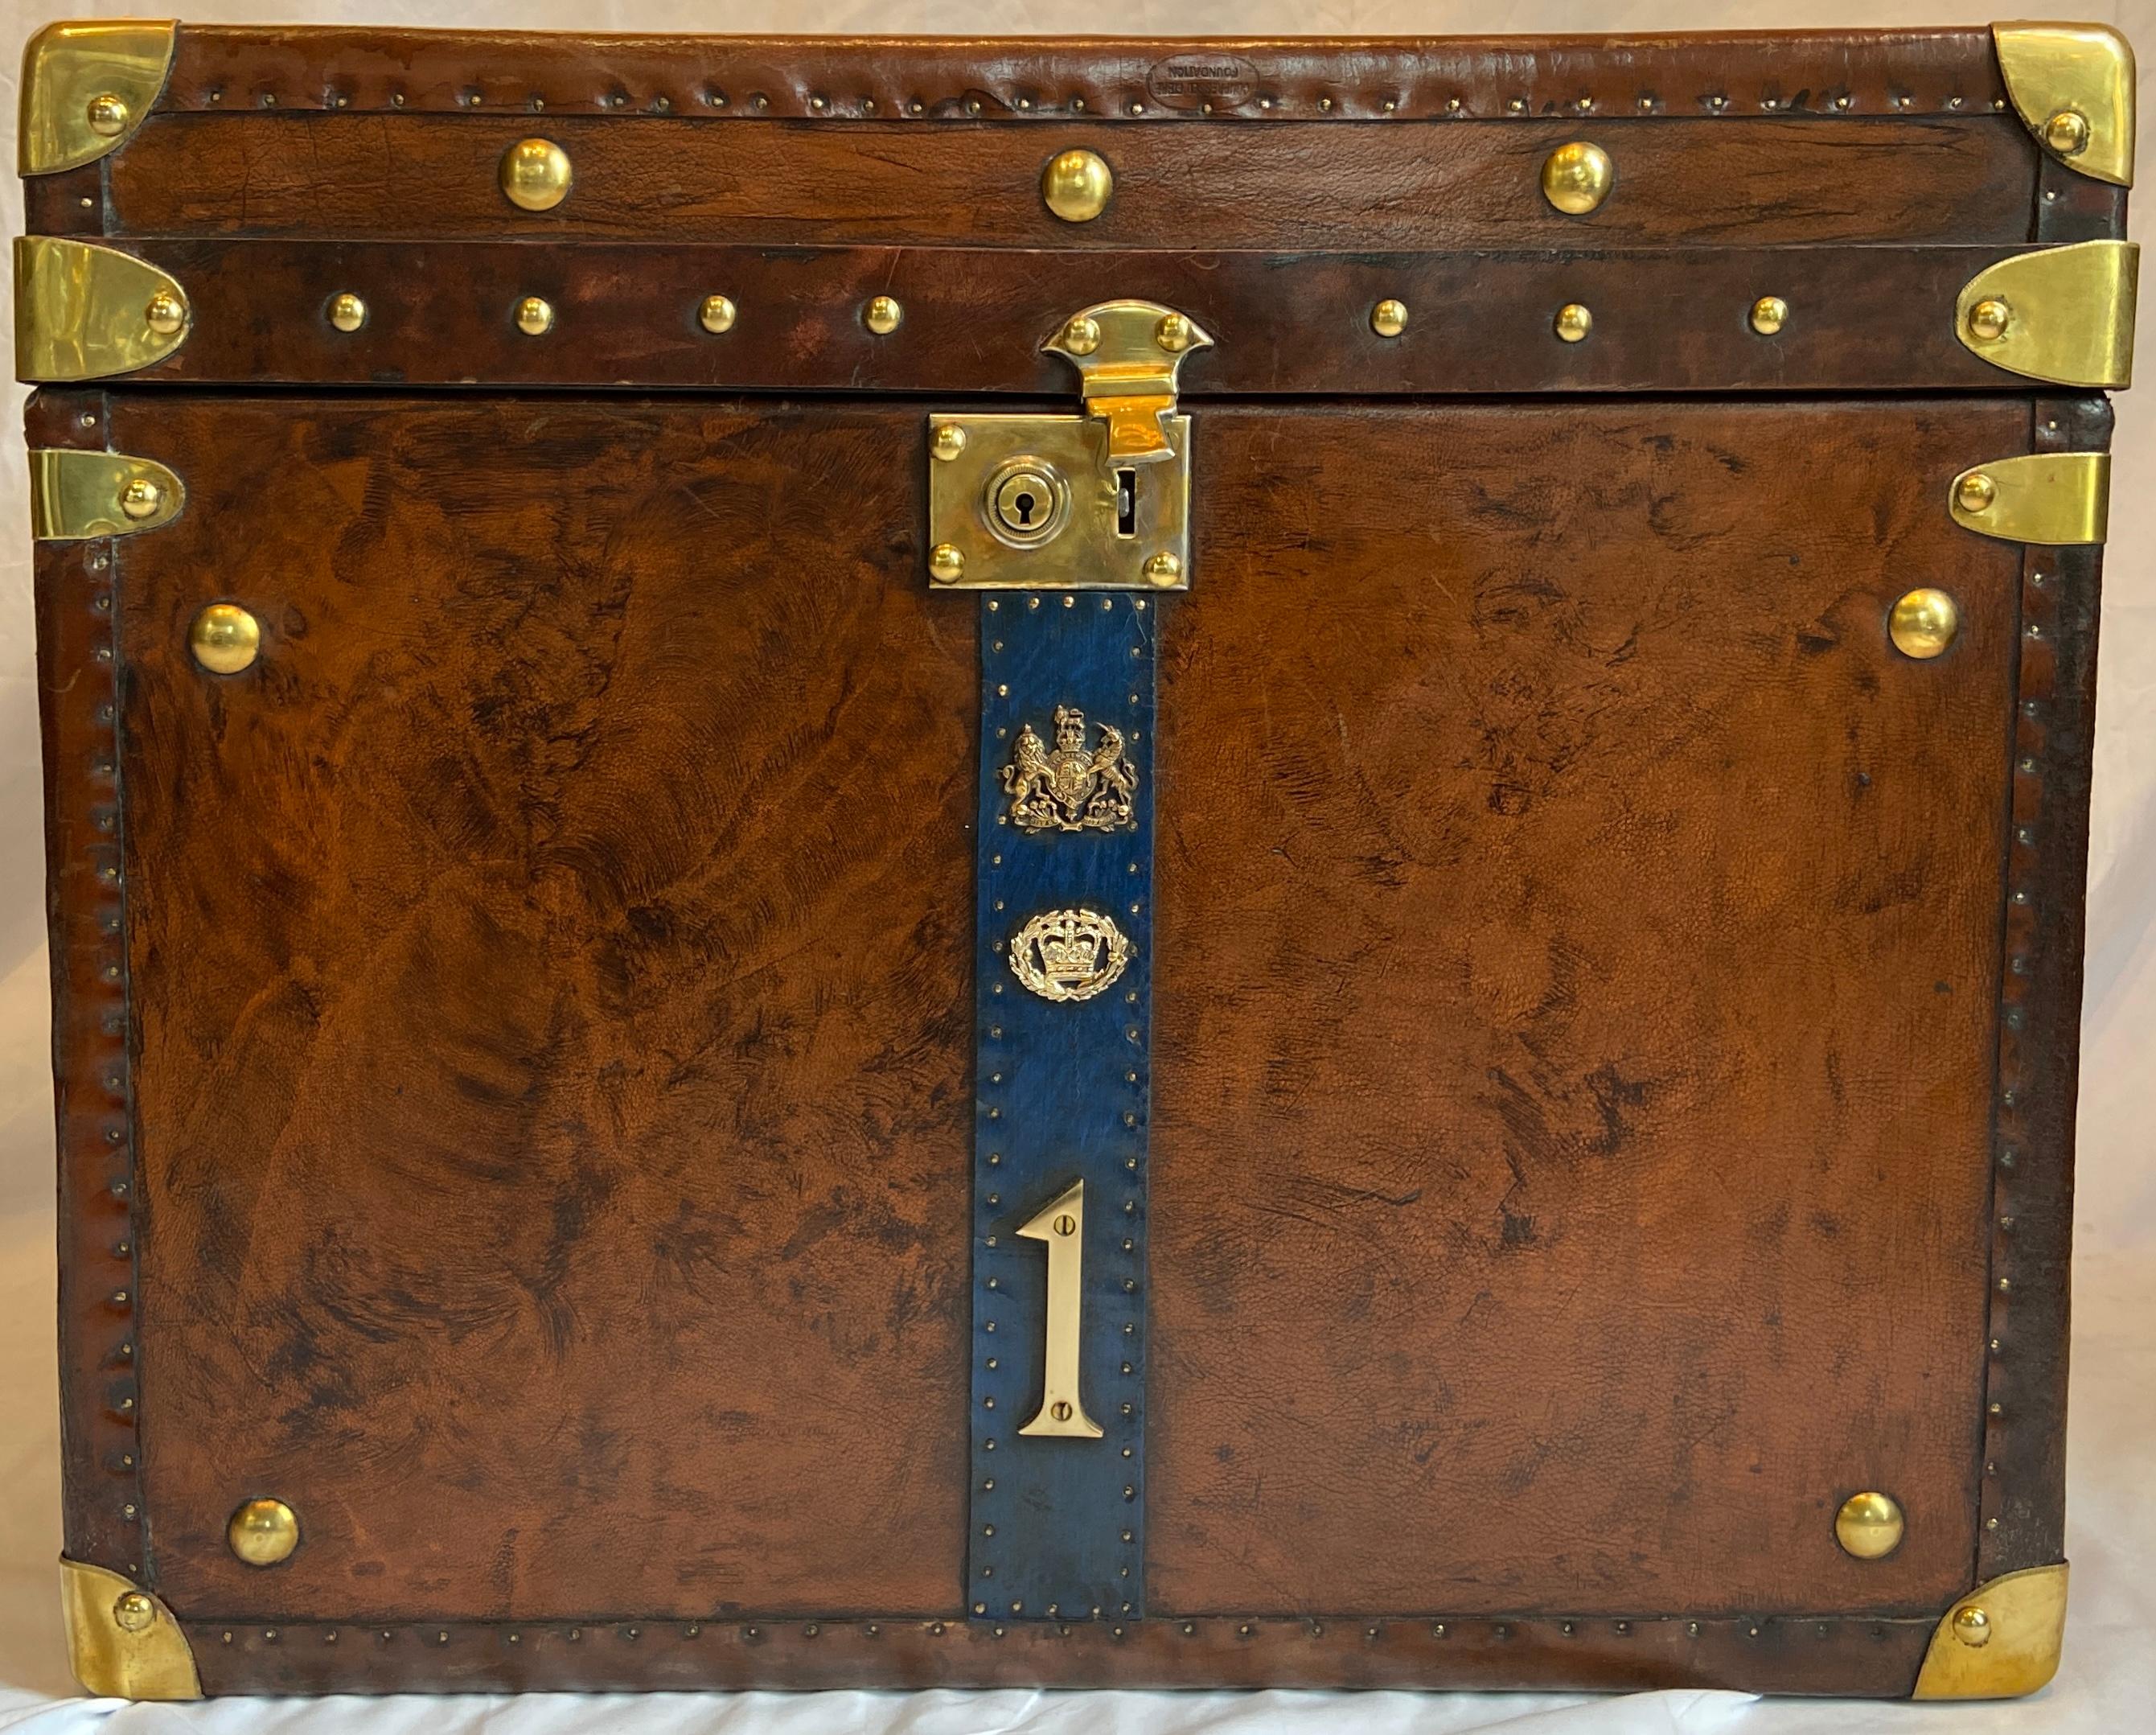 Pair antique British military leather luggage chests with insignia of warrant officer or regimental sergeant major, circa 1920-1930.